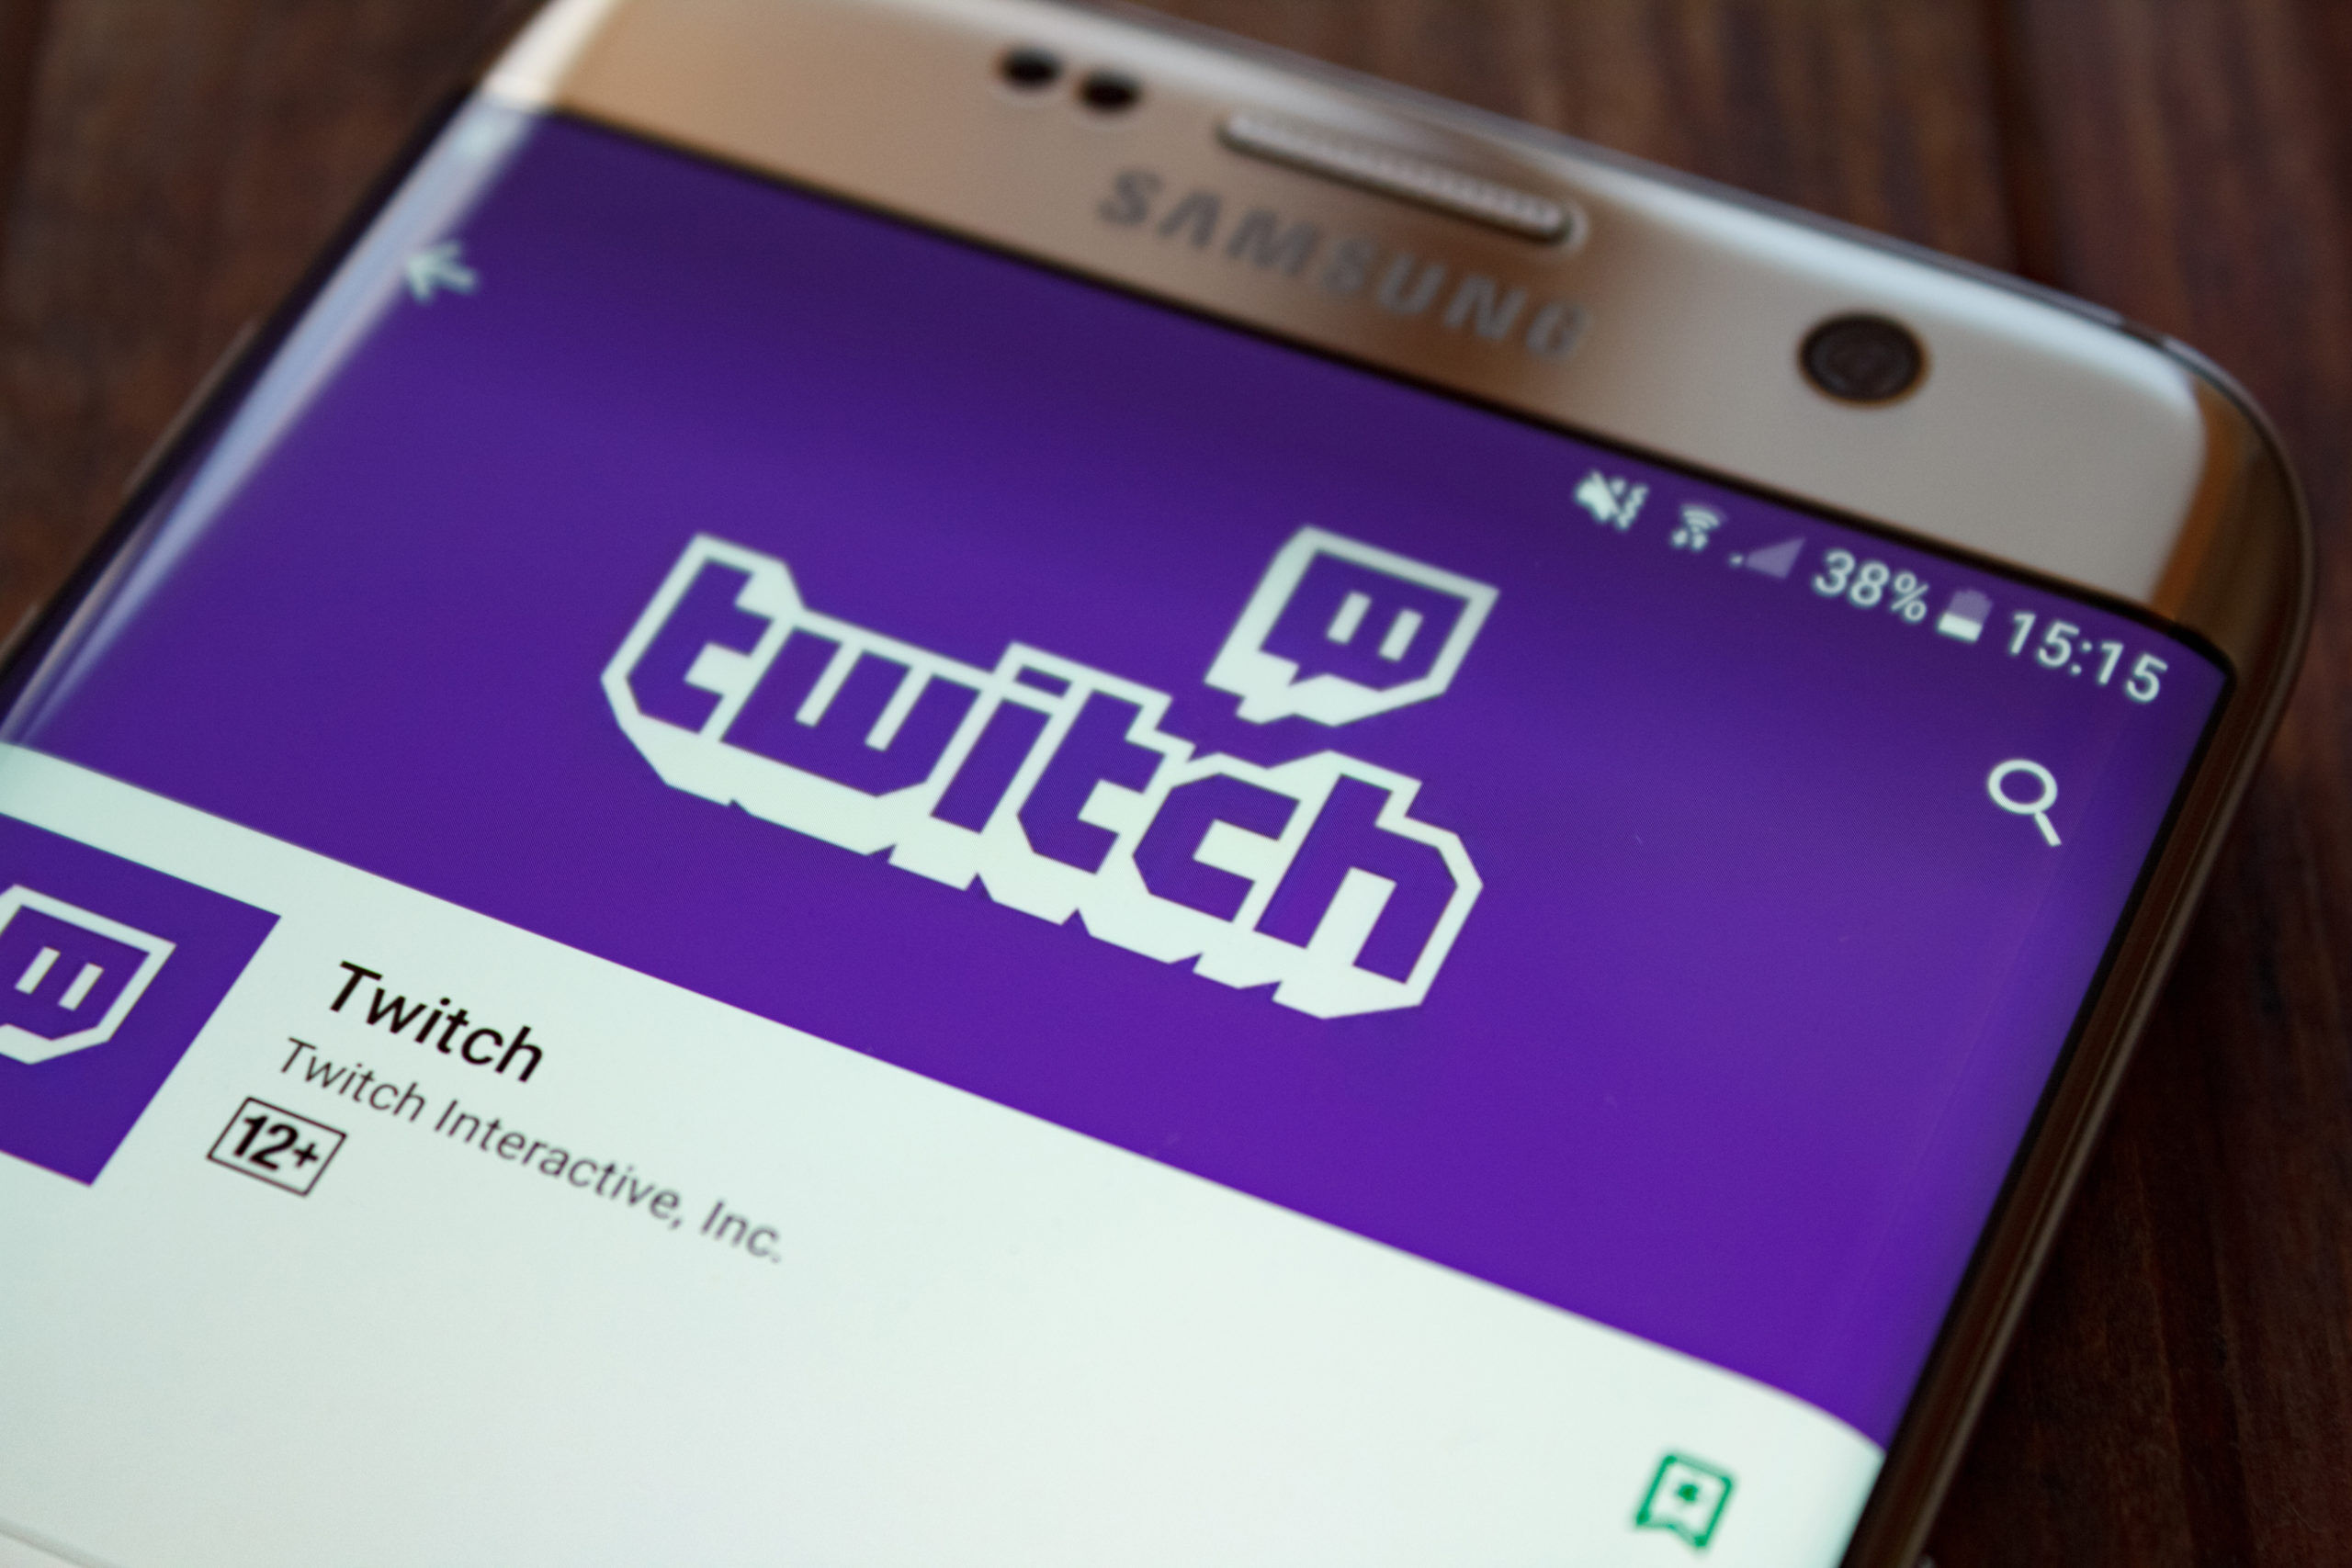 Twitch logo on smartphone screen on wooden background.